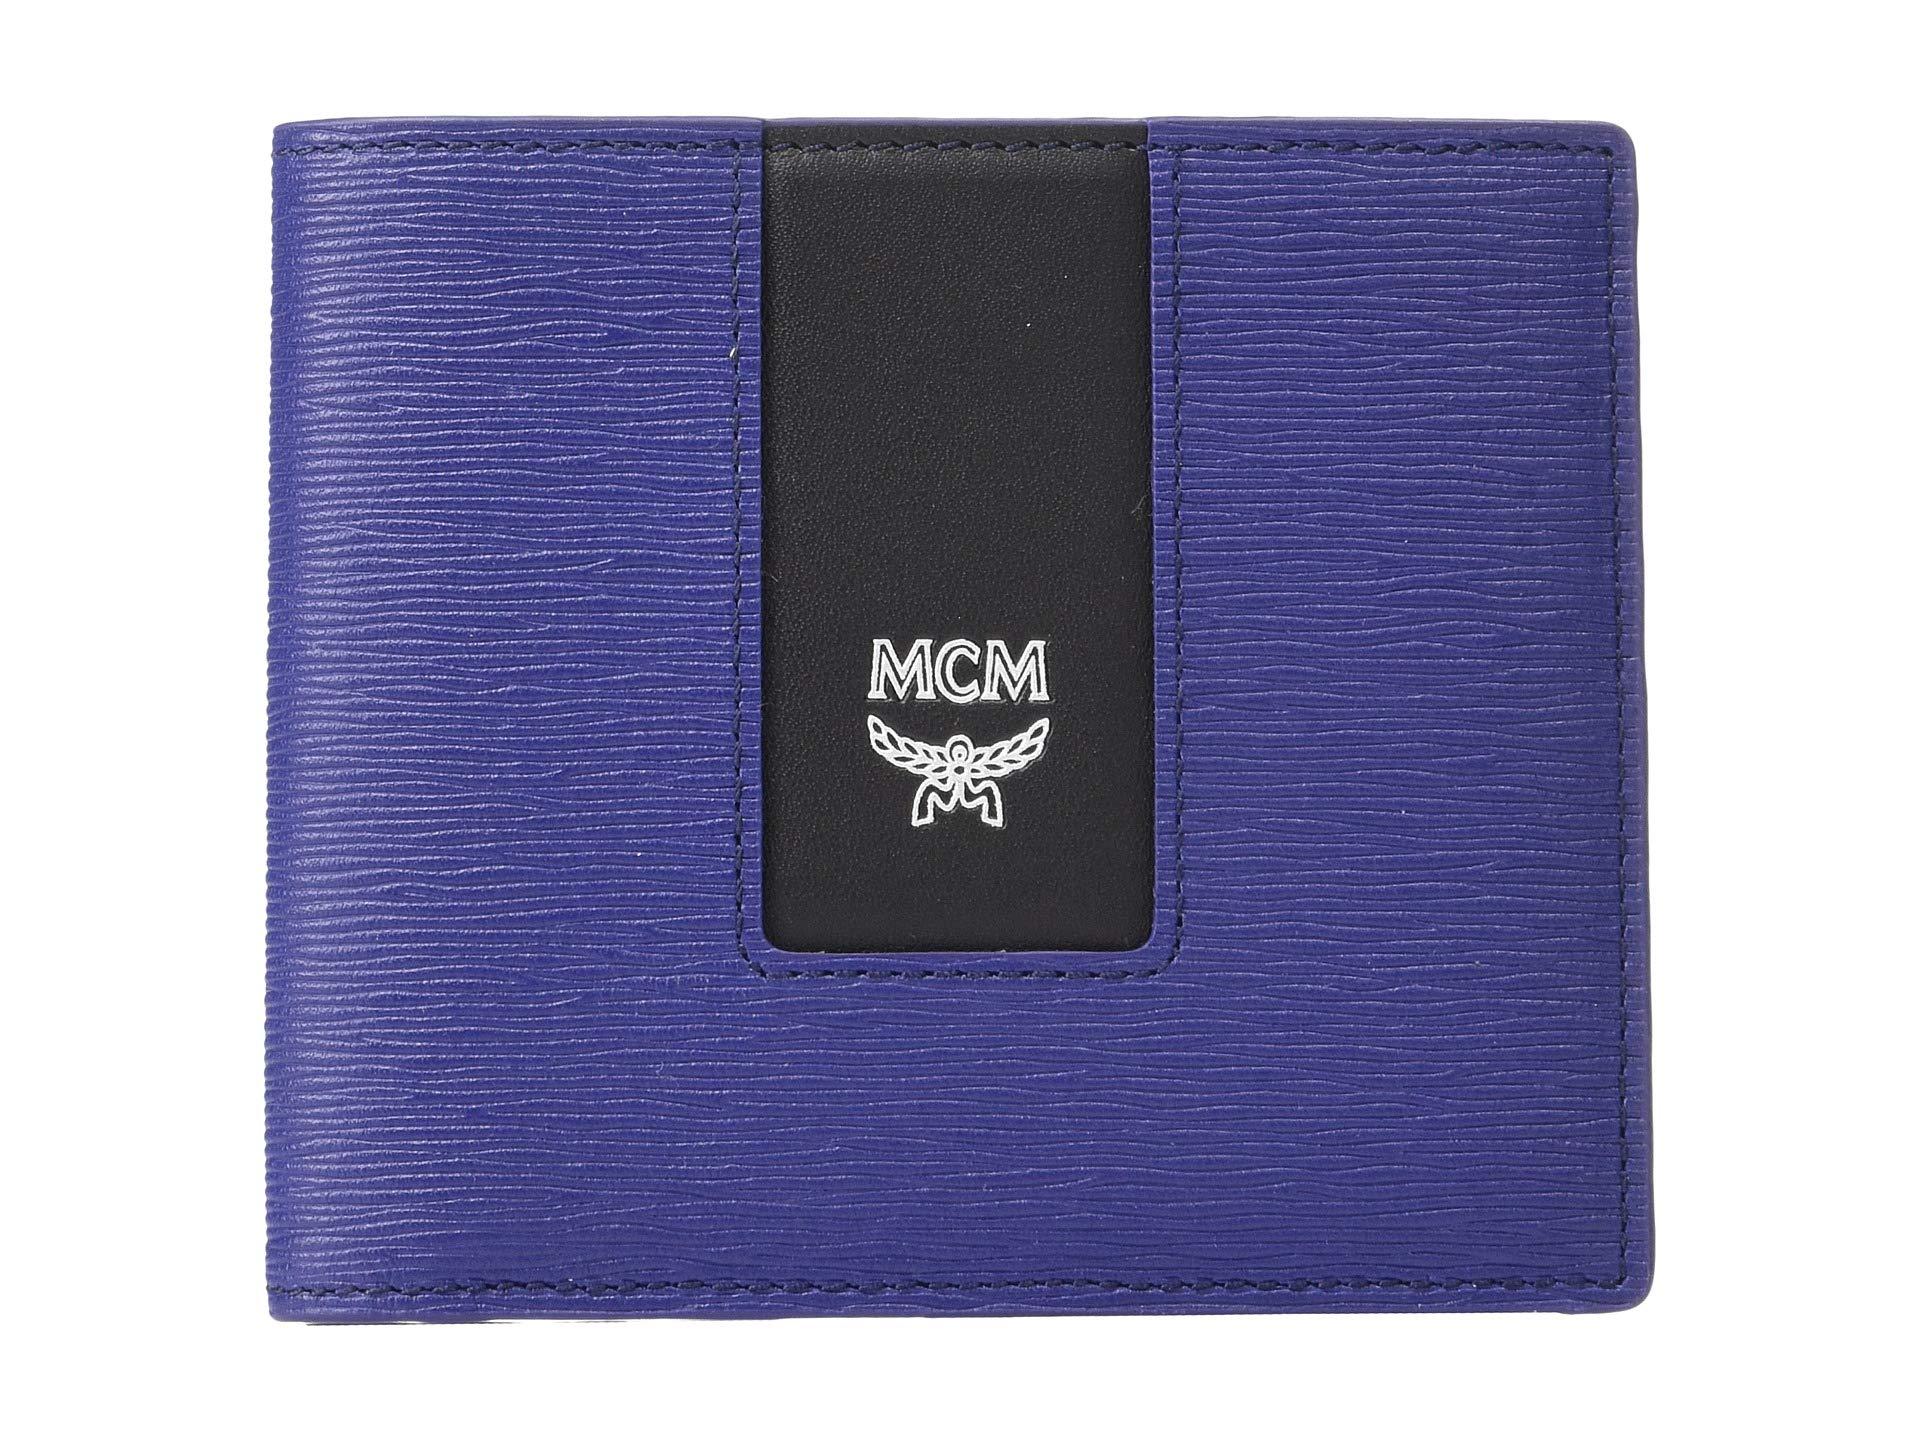 MCM Coburg Emblem Flap Wallet/two-fold Small in Blue for Men - Save 20% ...